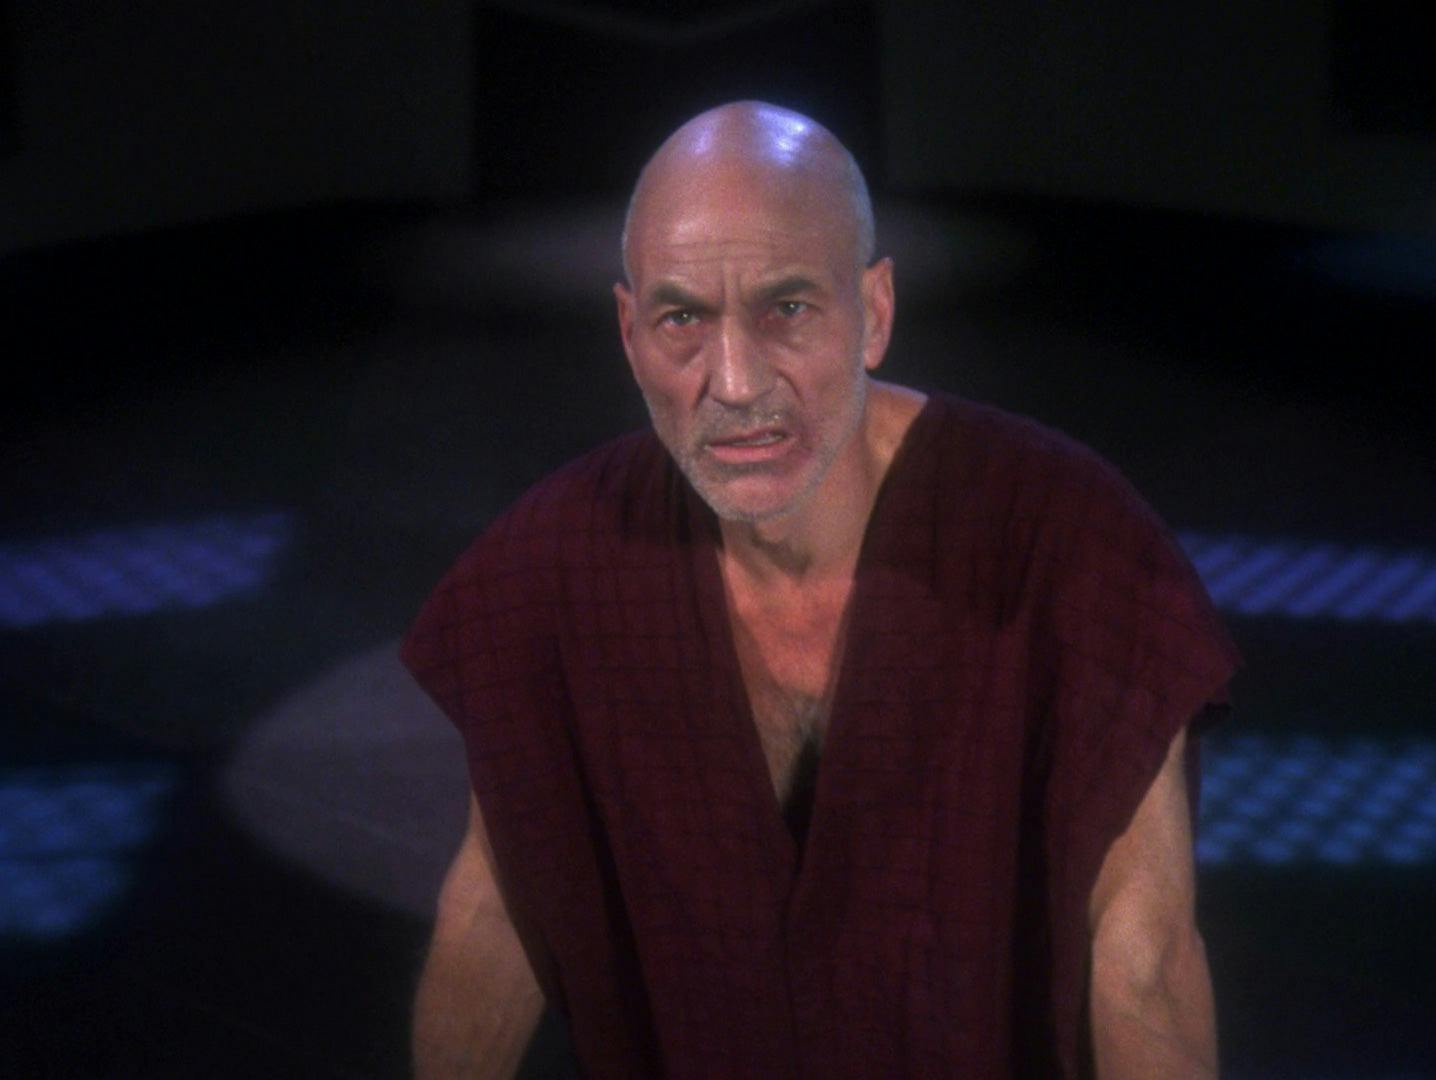 Picard is tortured in 